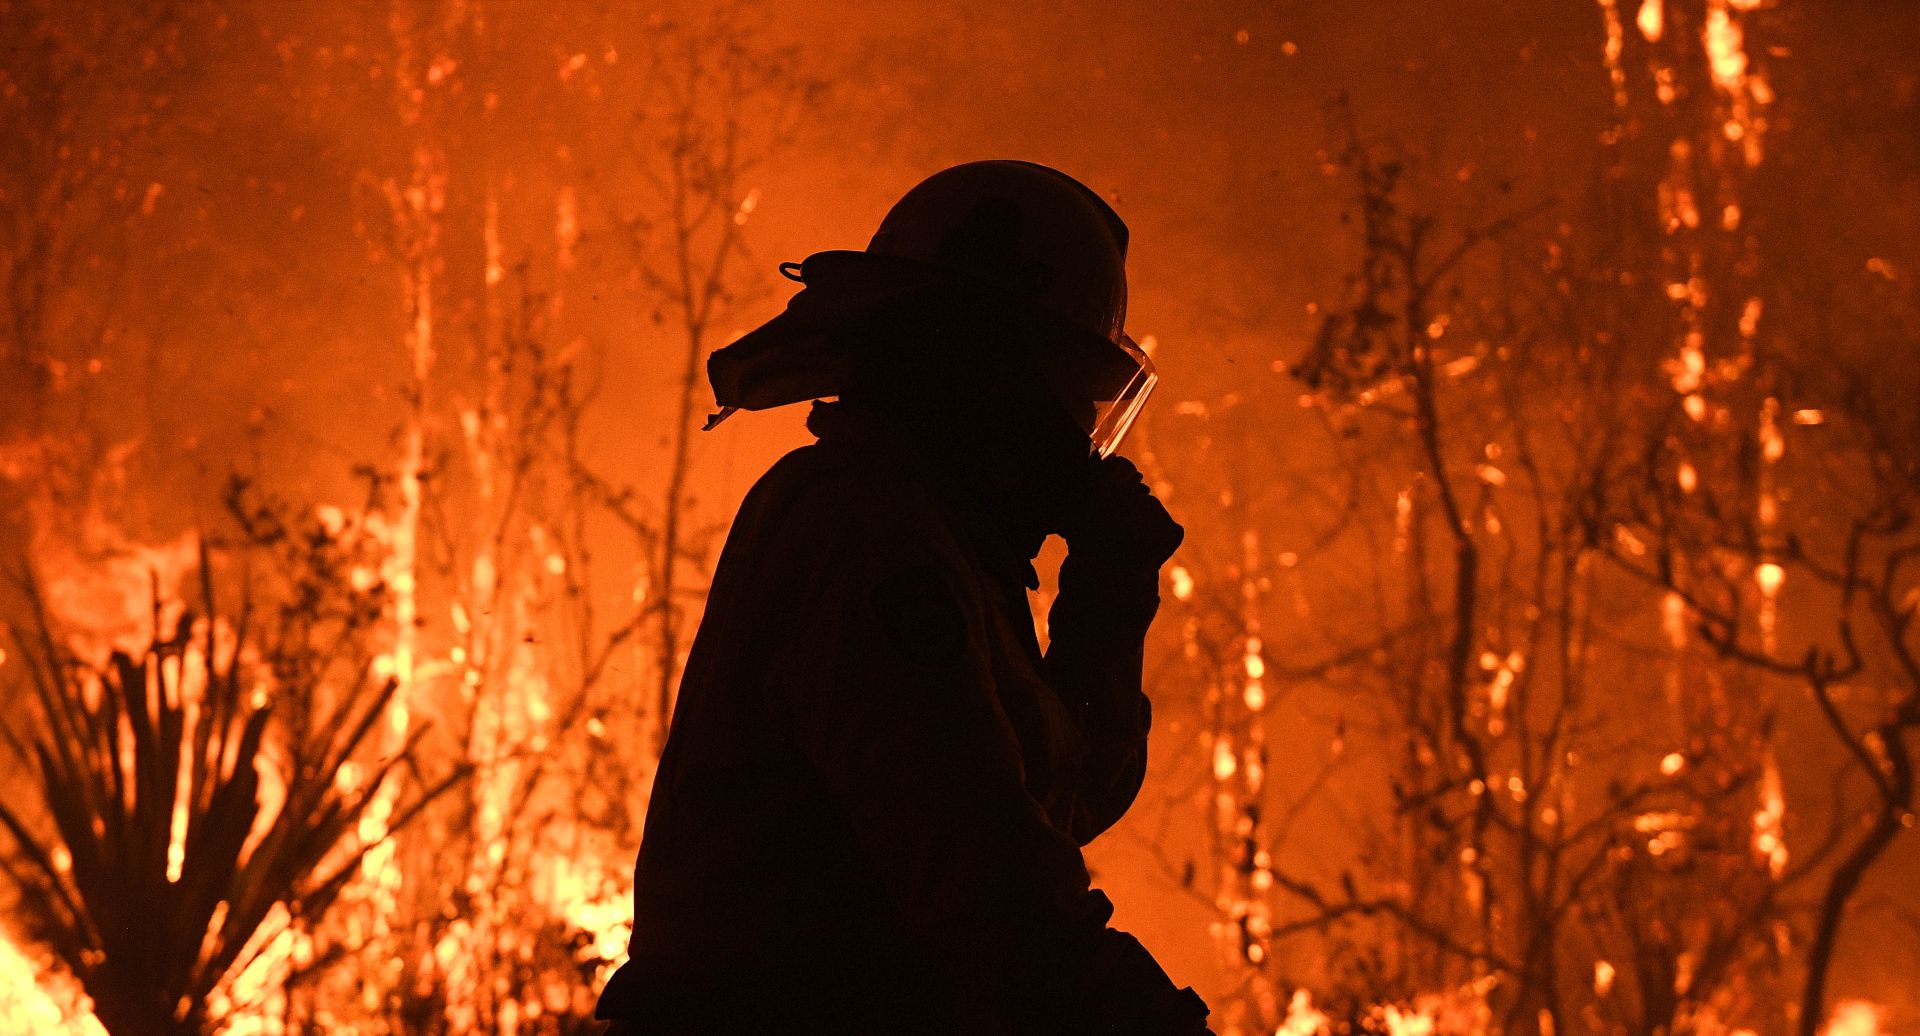 epa08046180 A New South Wales (NSW) Rural Fire Service officer reacts as he protects properties on Waratah Road and Kelynack Road as the Three Mile fire approaches Mangrove Mountain, north of Sydney, New South Wales, Australia, 05 December 2019. Emergency warnings were issued on 05 December for bushfires in New South Wales with much of the state facing record-breaking poor air quality ratings.  EPA/DAN HIMBRECHTS AUSTRALIA AND NEW ZEALAND OUT